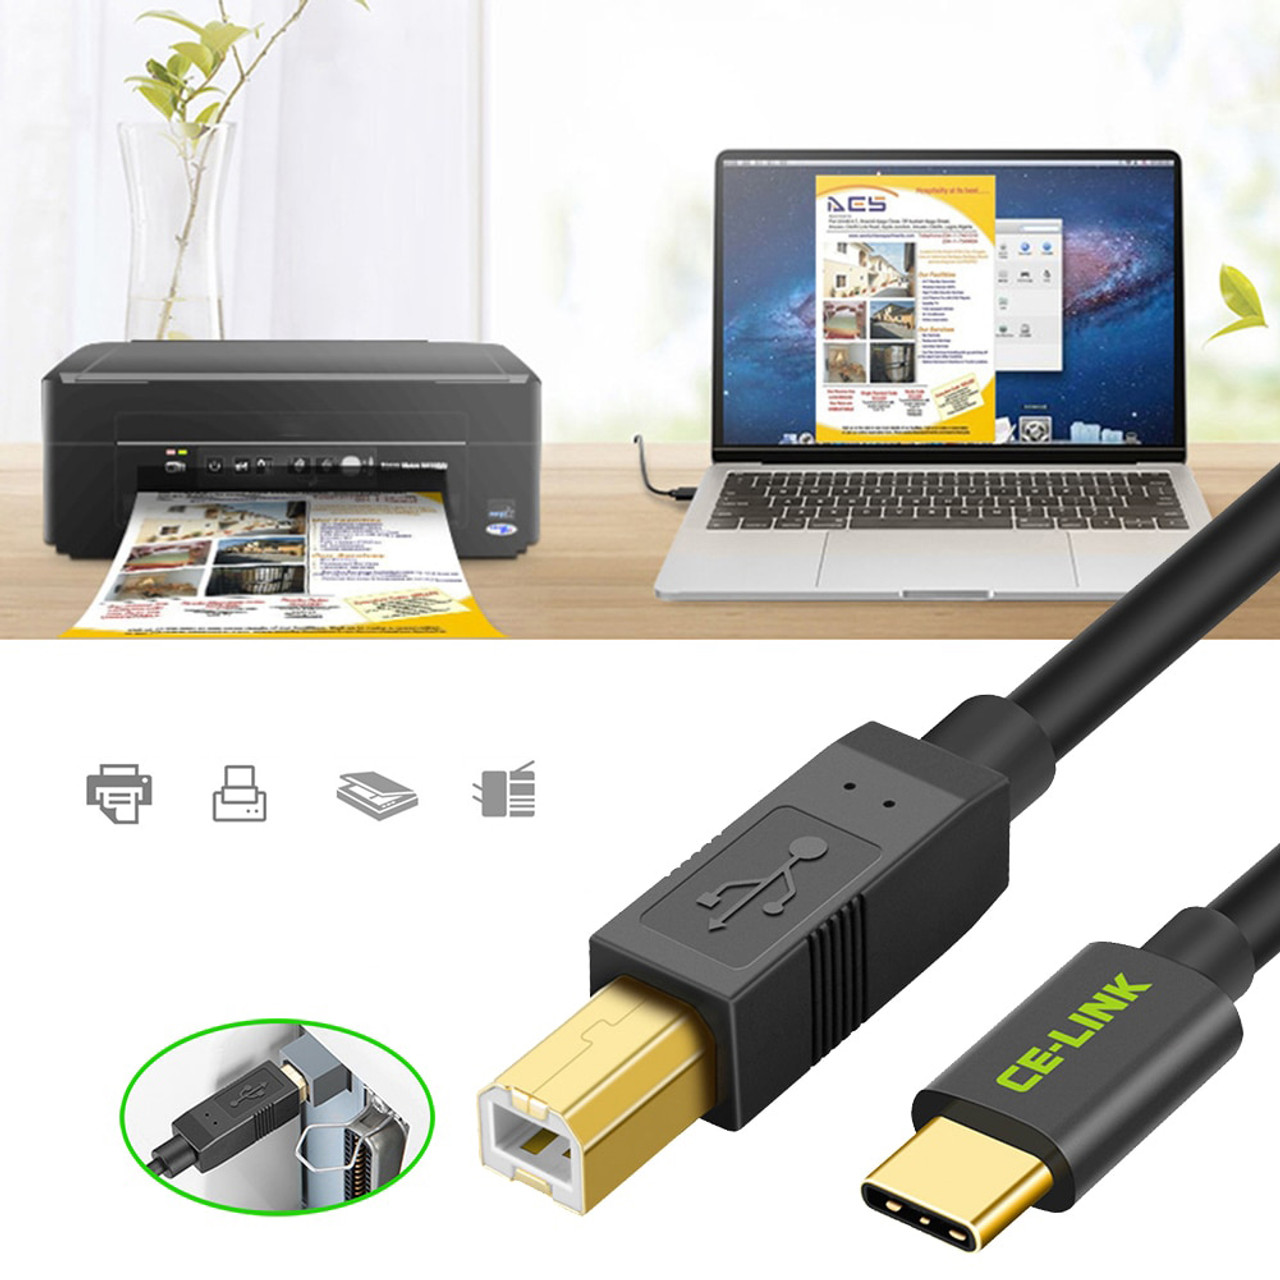 CE-Link USB 3.1 Type-C Male to USB 2.0 Type-B Male Adapter Cable Printer Scanner USB-C Cord 2M